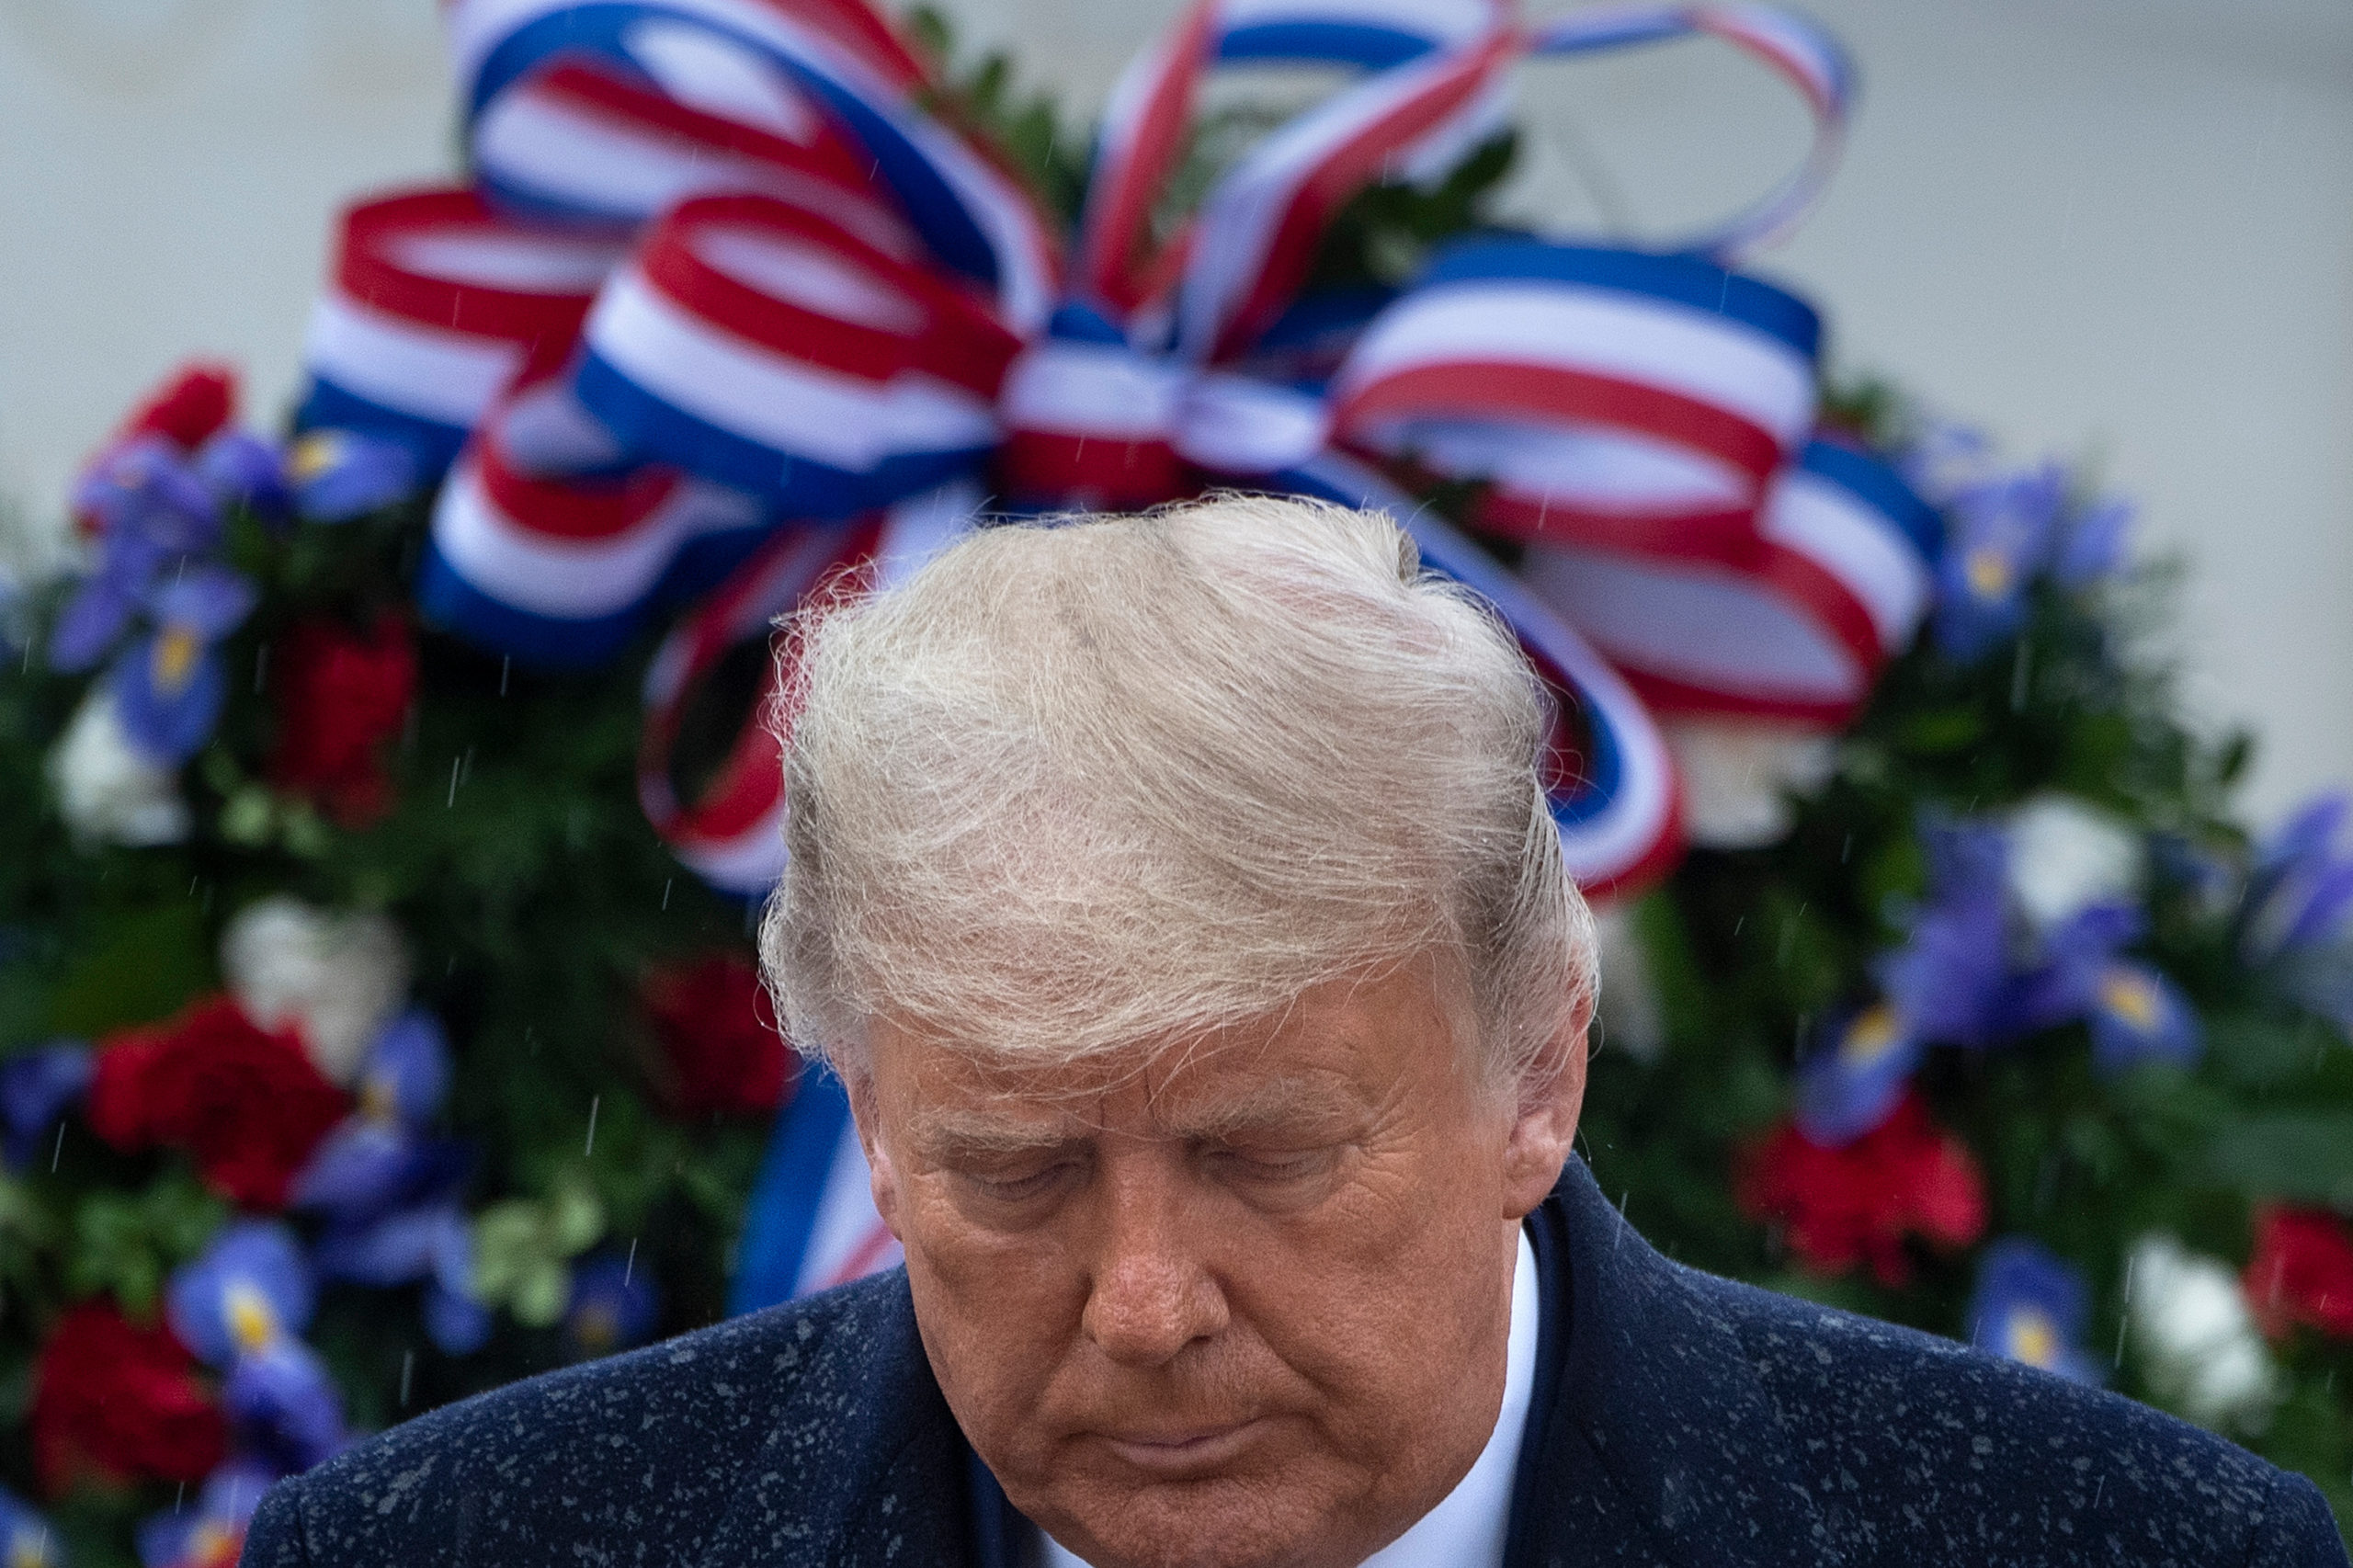 US President Donald Trump leaves after placing a wreath at the Tomb of the Unknown Soldier on Veterans Day at Arlington National Cemetery in Arlington, Virginia, on November 11, 2020. - US President Donald Trump made his first official post-election appearance Wednesday for what should be a moment of national unity to mark Veteran's Day, now marred by his refusal to acknowledge Joe Biden's win. The president visited Arlington National Cemetery, four days after US media projected his Democratic rival would take the White House. (Photo by Brendan Smialowski / AFP) (Photo by BRENDAN SMIALOWSKI/AFP via Getty Images)